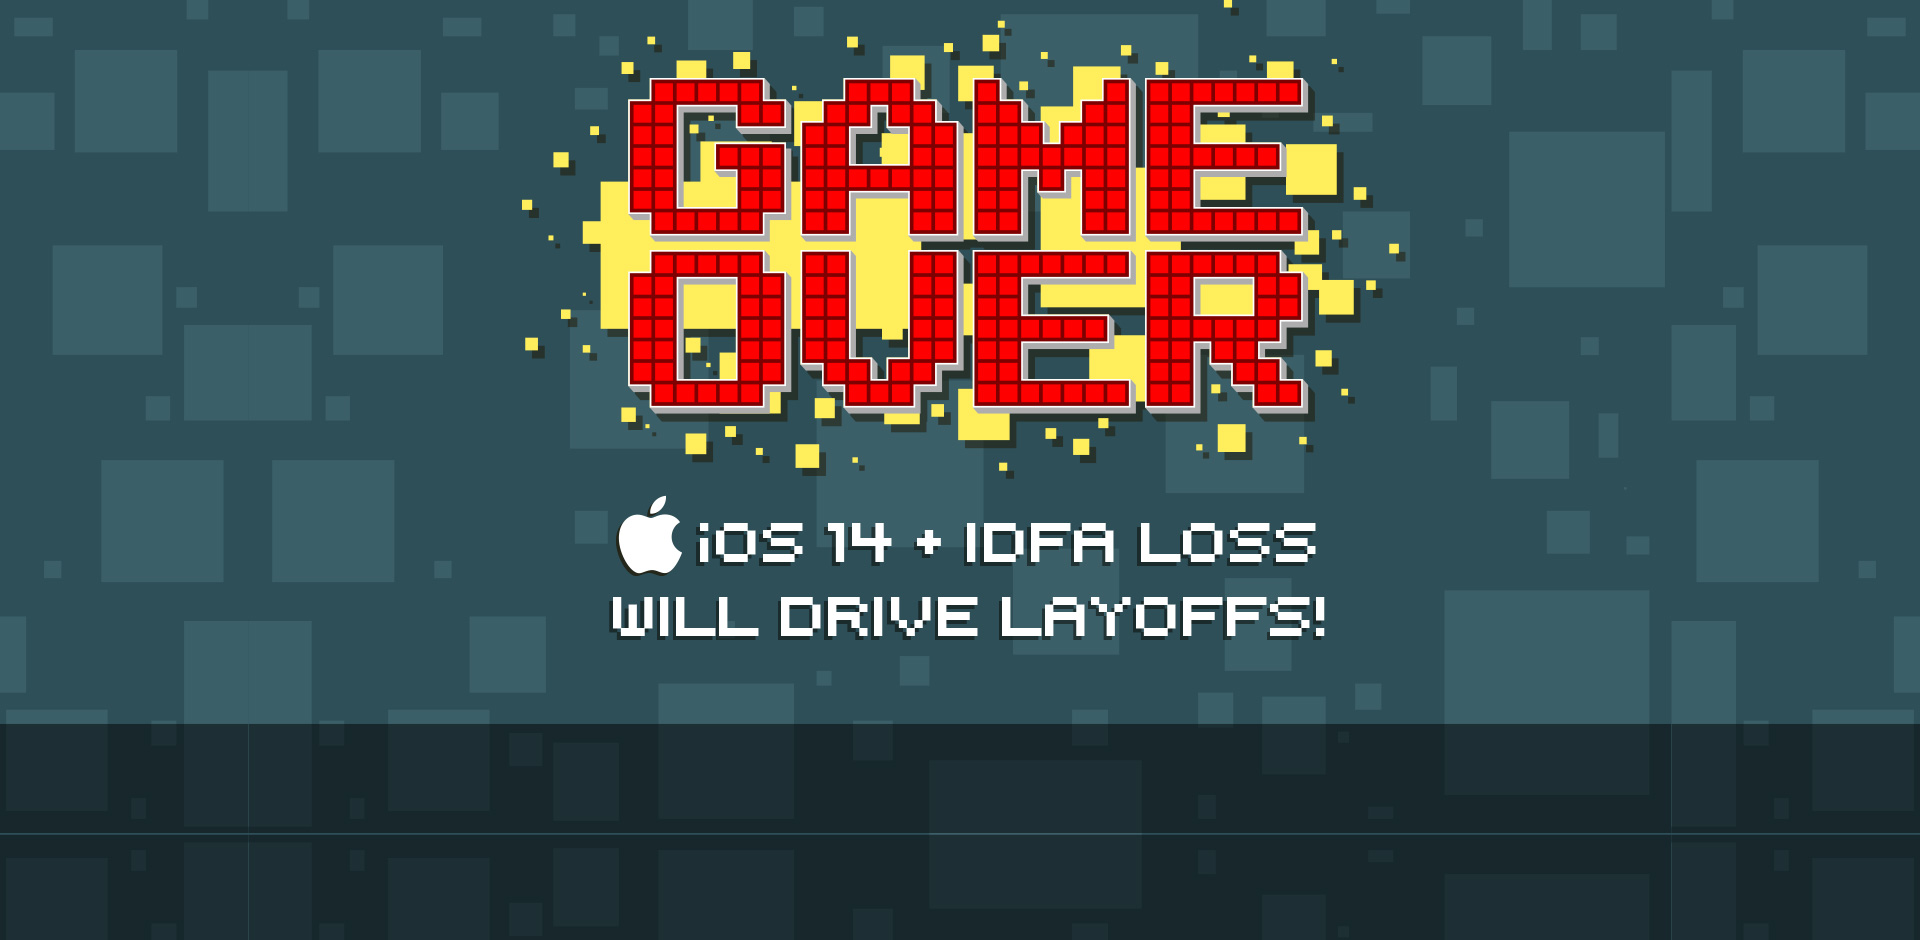 Game Over – Apple’s iOS 14 & IDFA Loss Will Drive Layoffs!